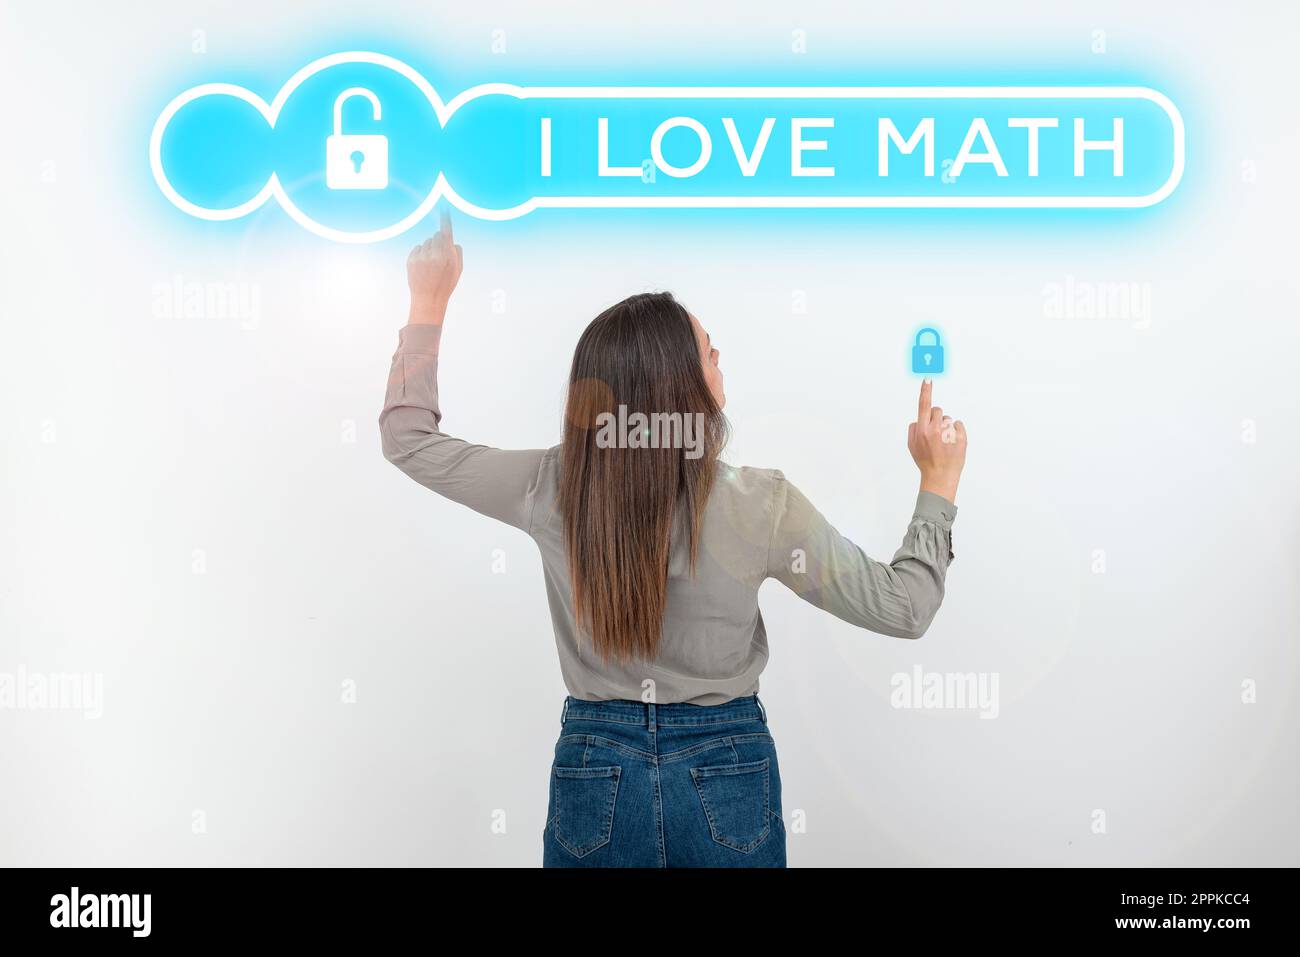 Sign displaying I Love Math. Internet Concept To like a lot doing calculations mathematics number geek person Stock Photo